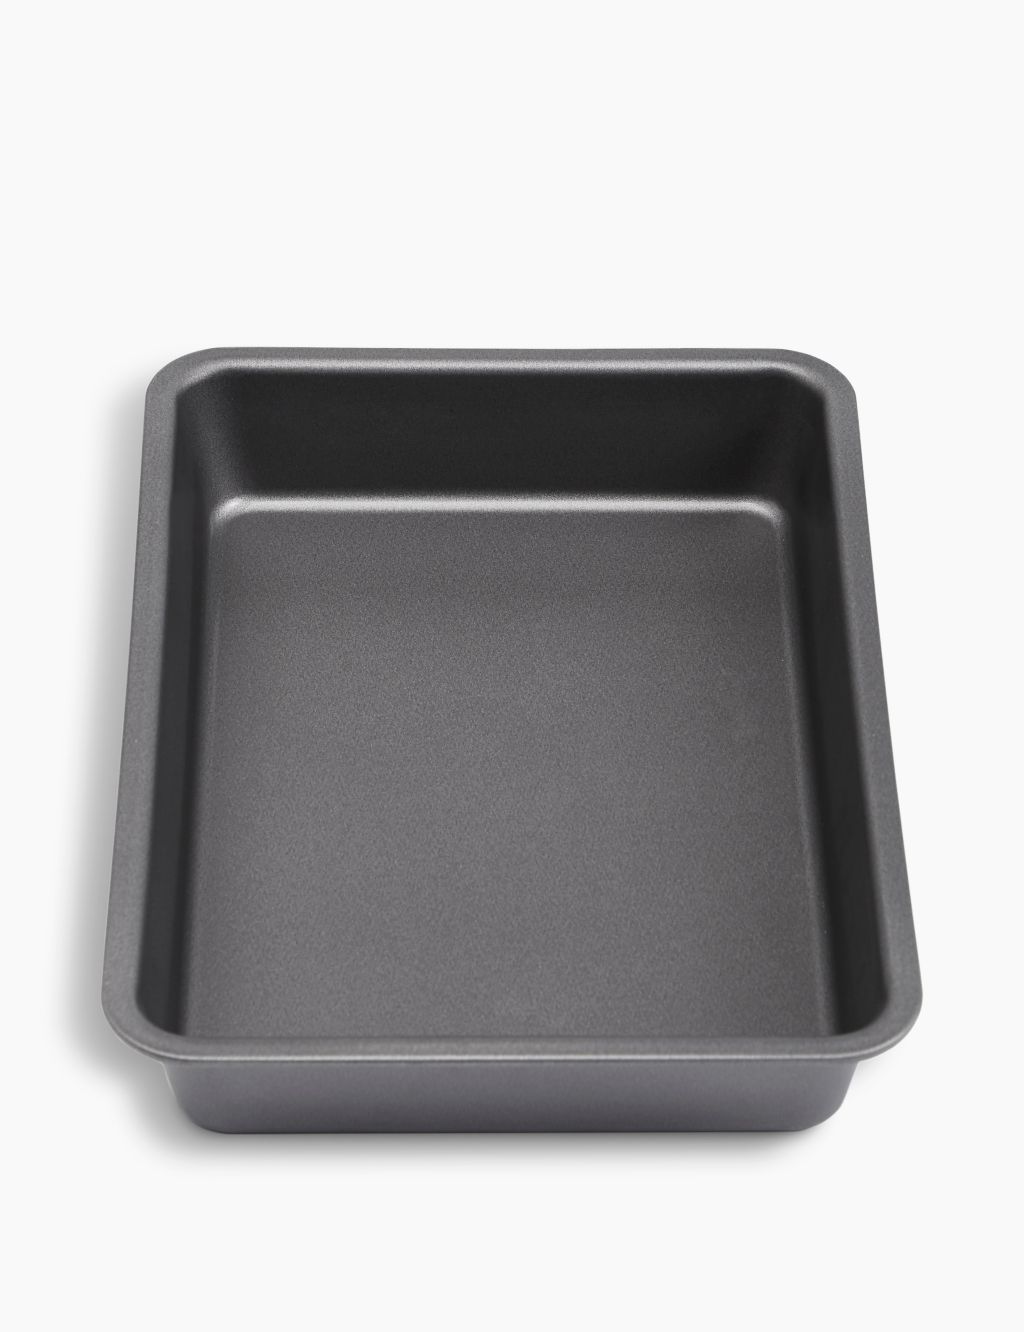 Set of 2 Oven Trays, M&S Collection